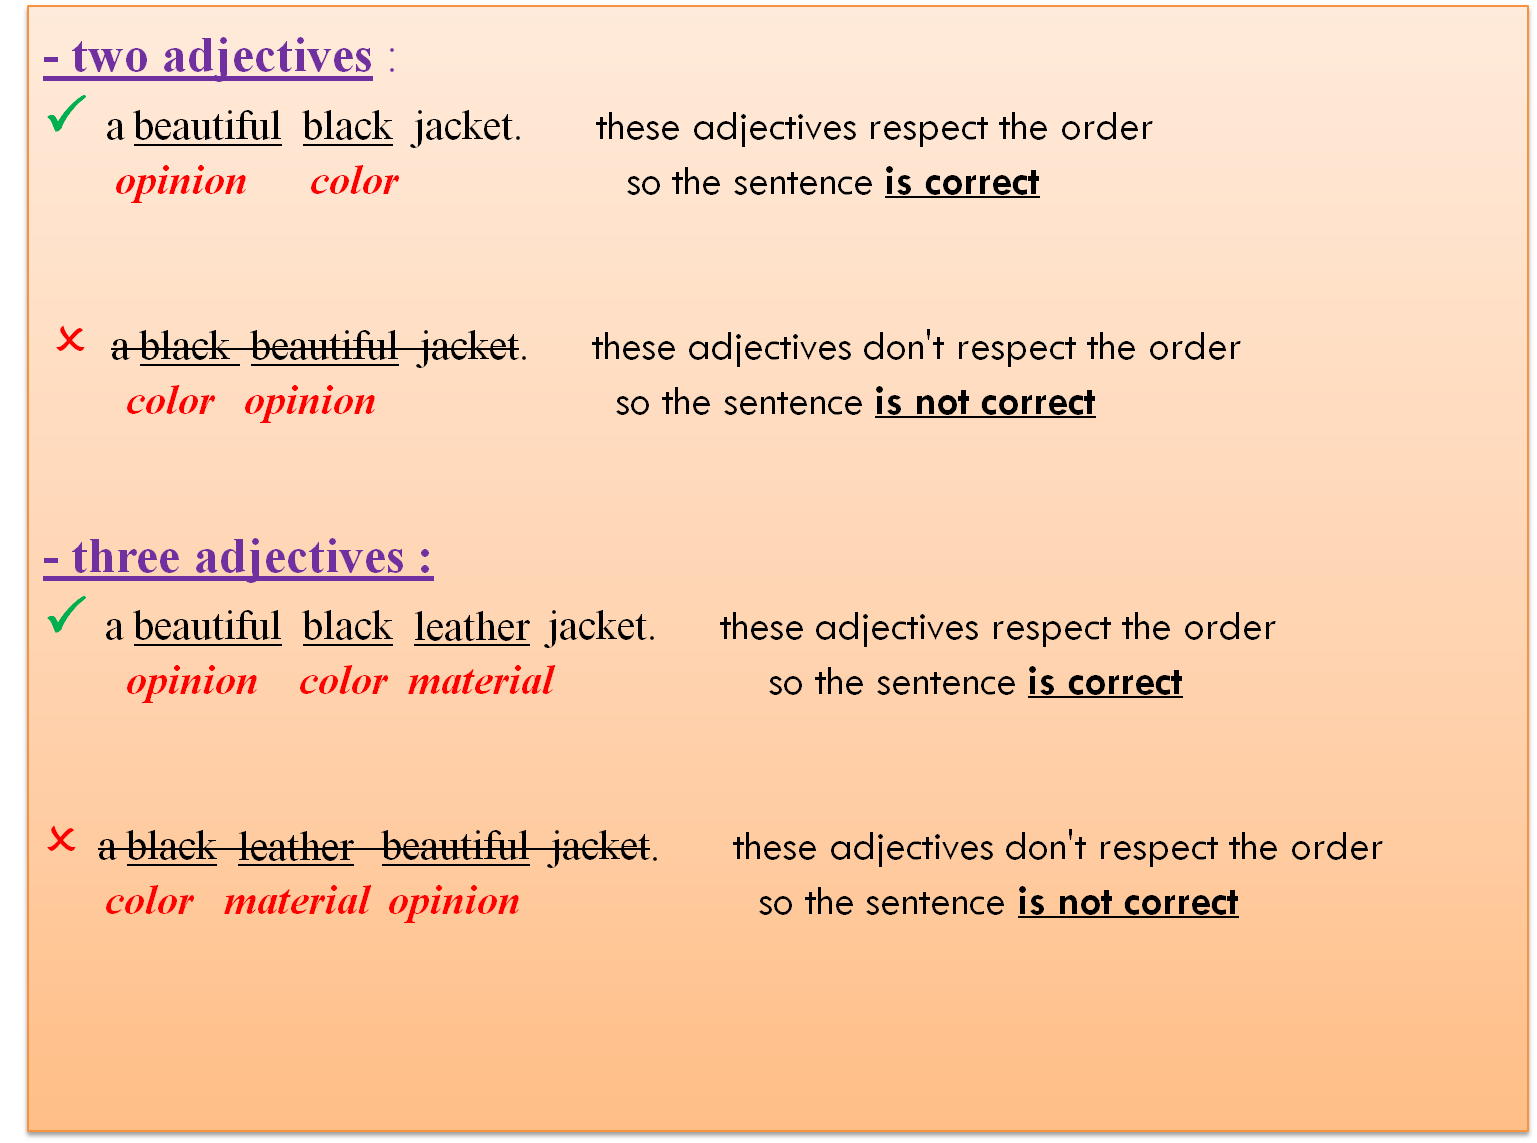 Opinion adjectives примеры. Age adjectives. Fact and opinion adjectives. Opinion adjectives and fact adjectives.